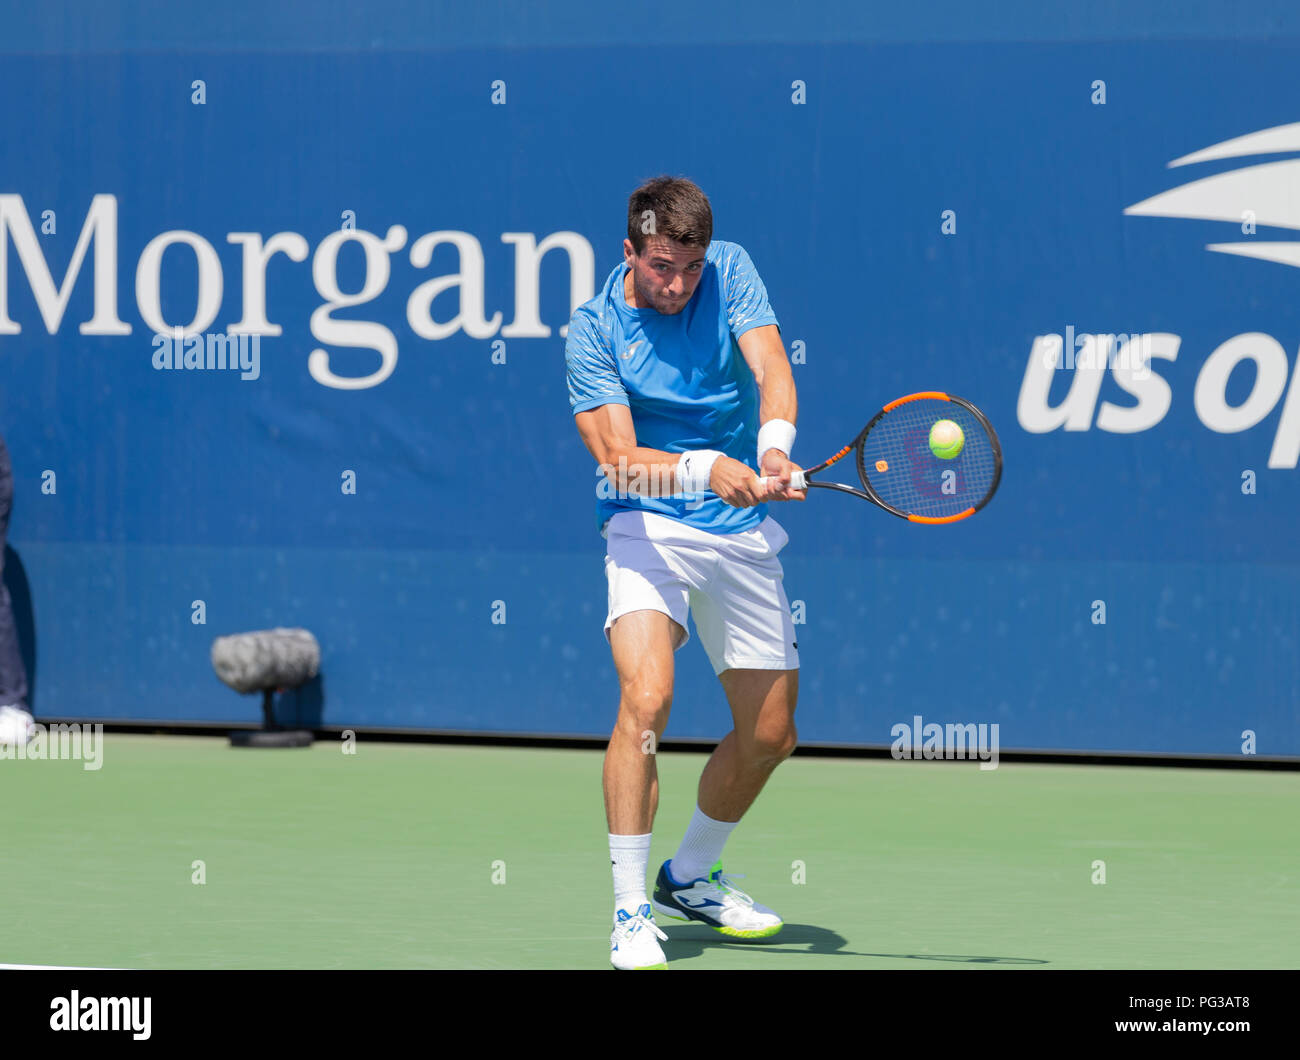 New York, NY - August 23, 2018: Pedro Martinez of Spain returns ball during  qualifying day 3 against Christian Harrison of USA at US Open Tennis  championship at USTA Billie Jean King